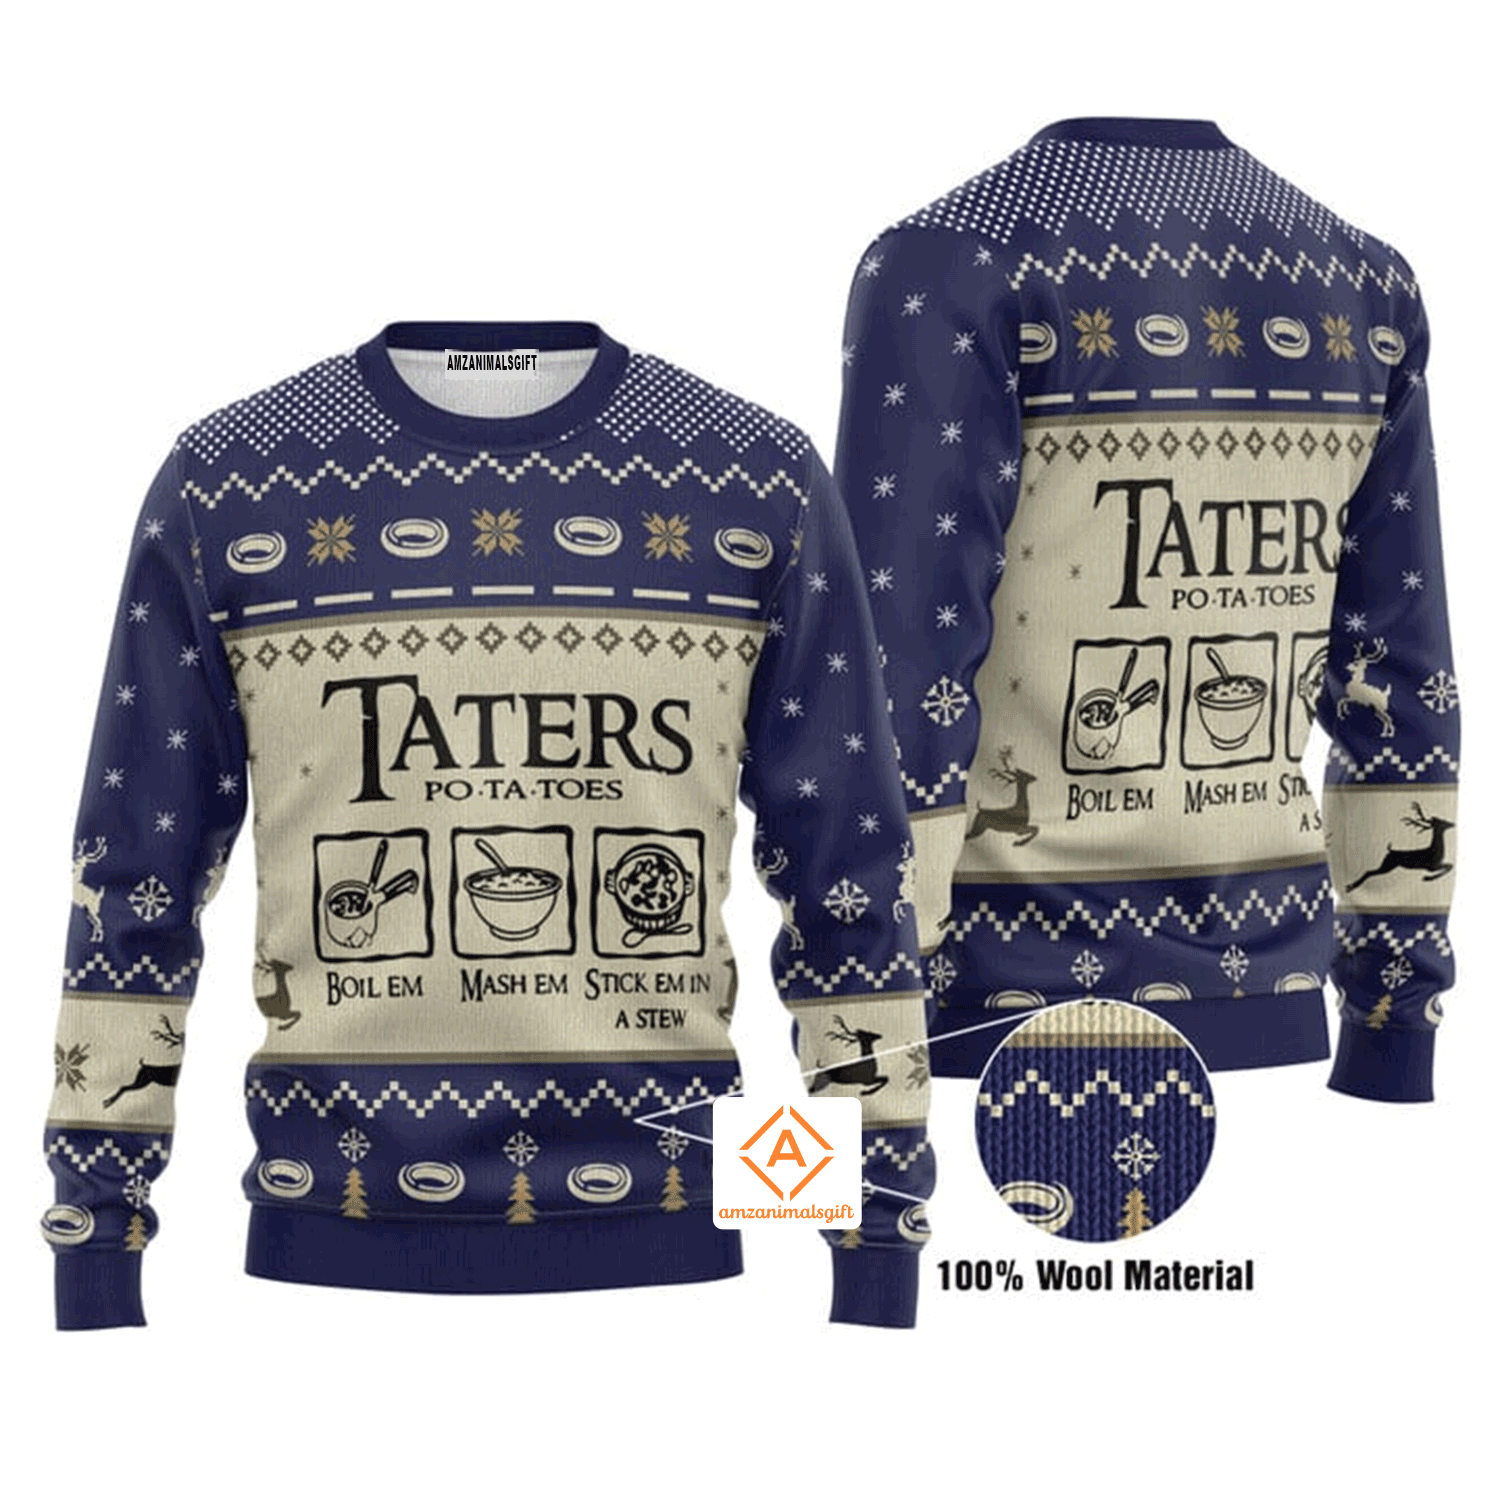 LOTR Taters Potatoes Christmas Sweater, Ugly Sweater For Men & Women, Perfect Outfit For Christmas New Year Autumn Winter